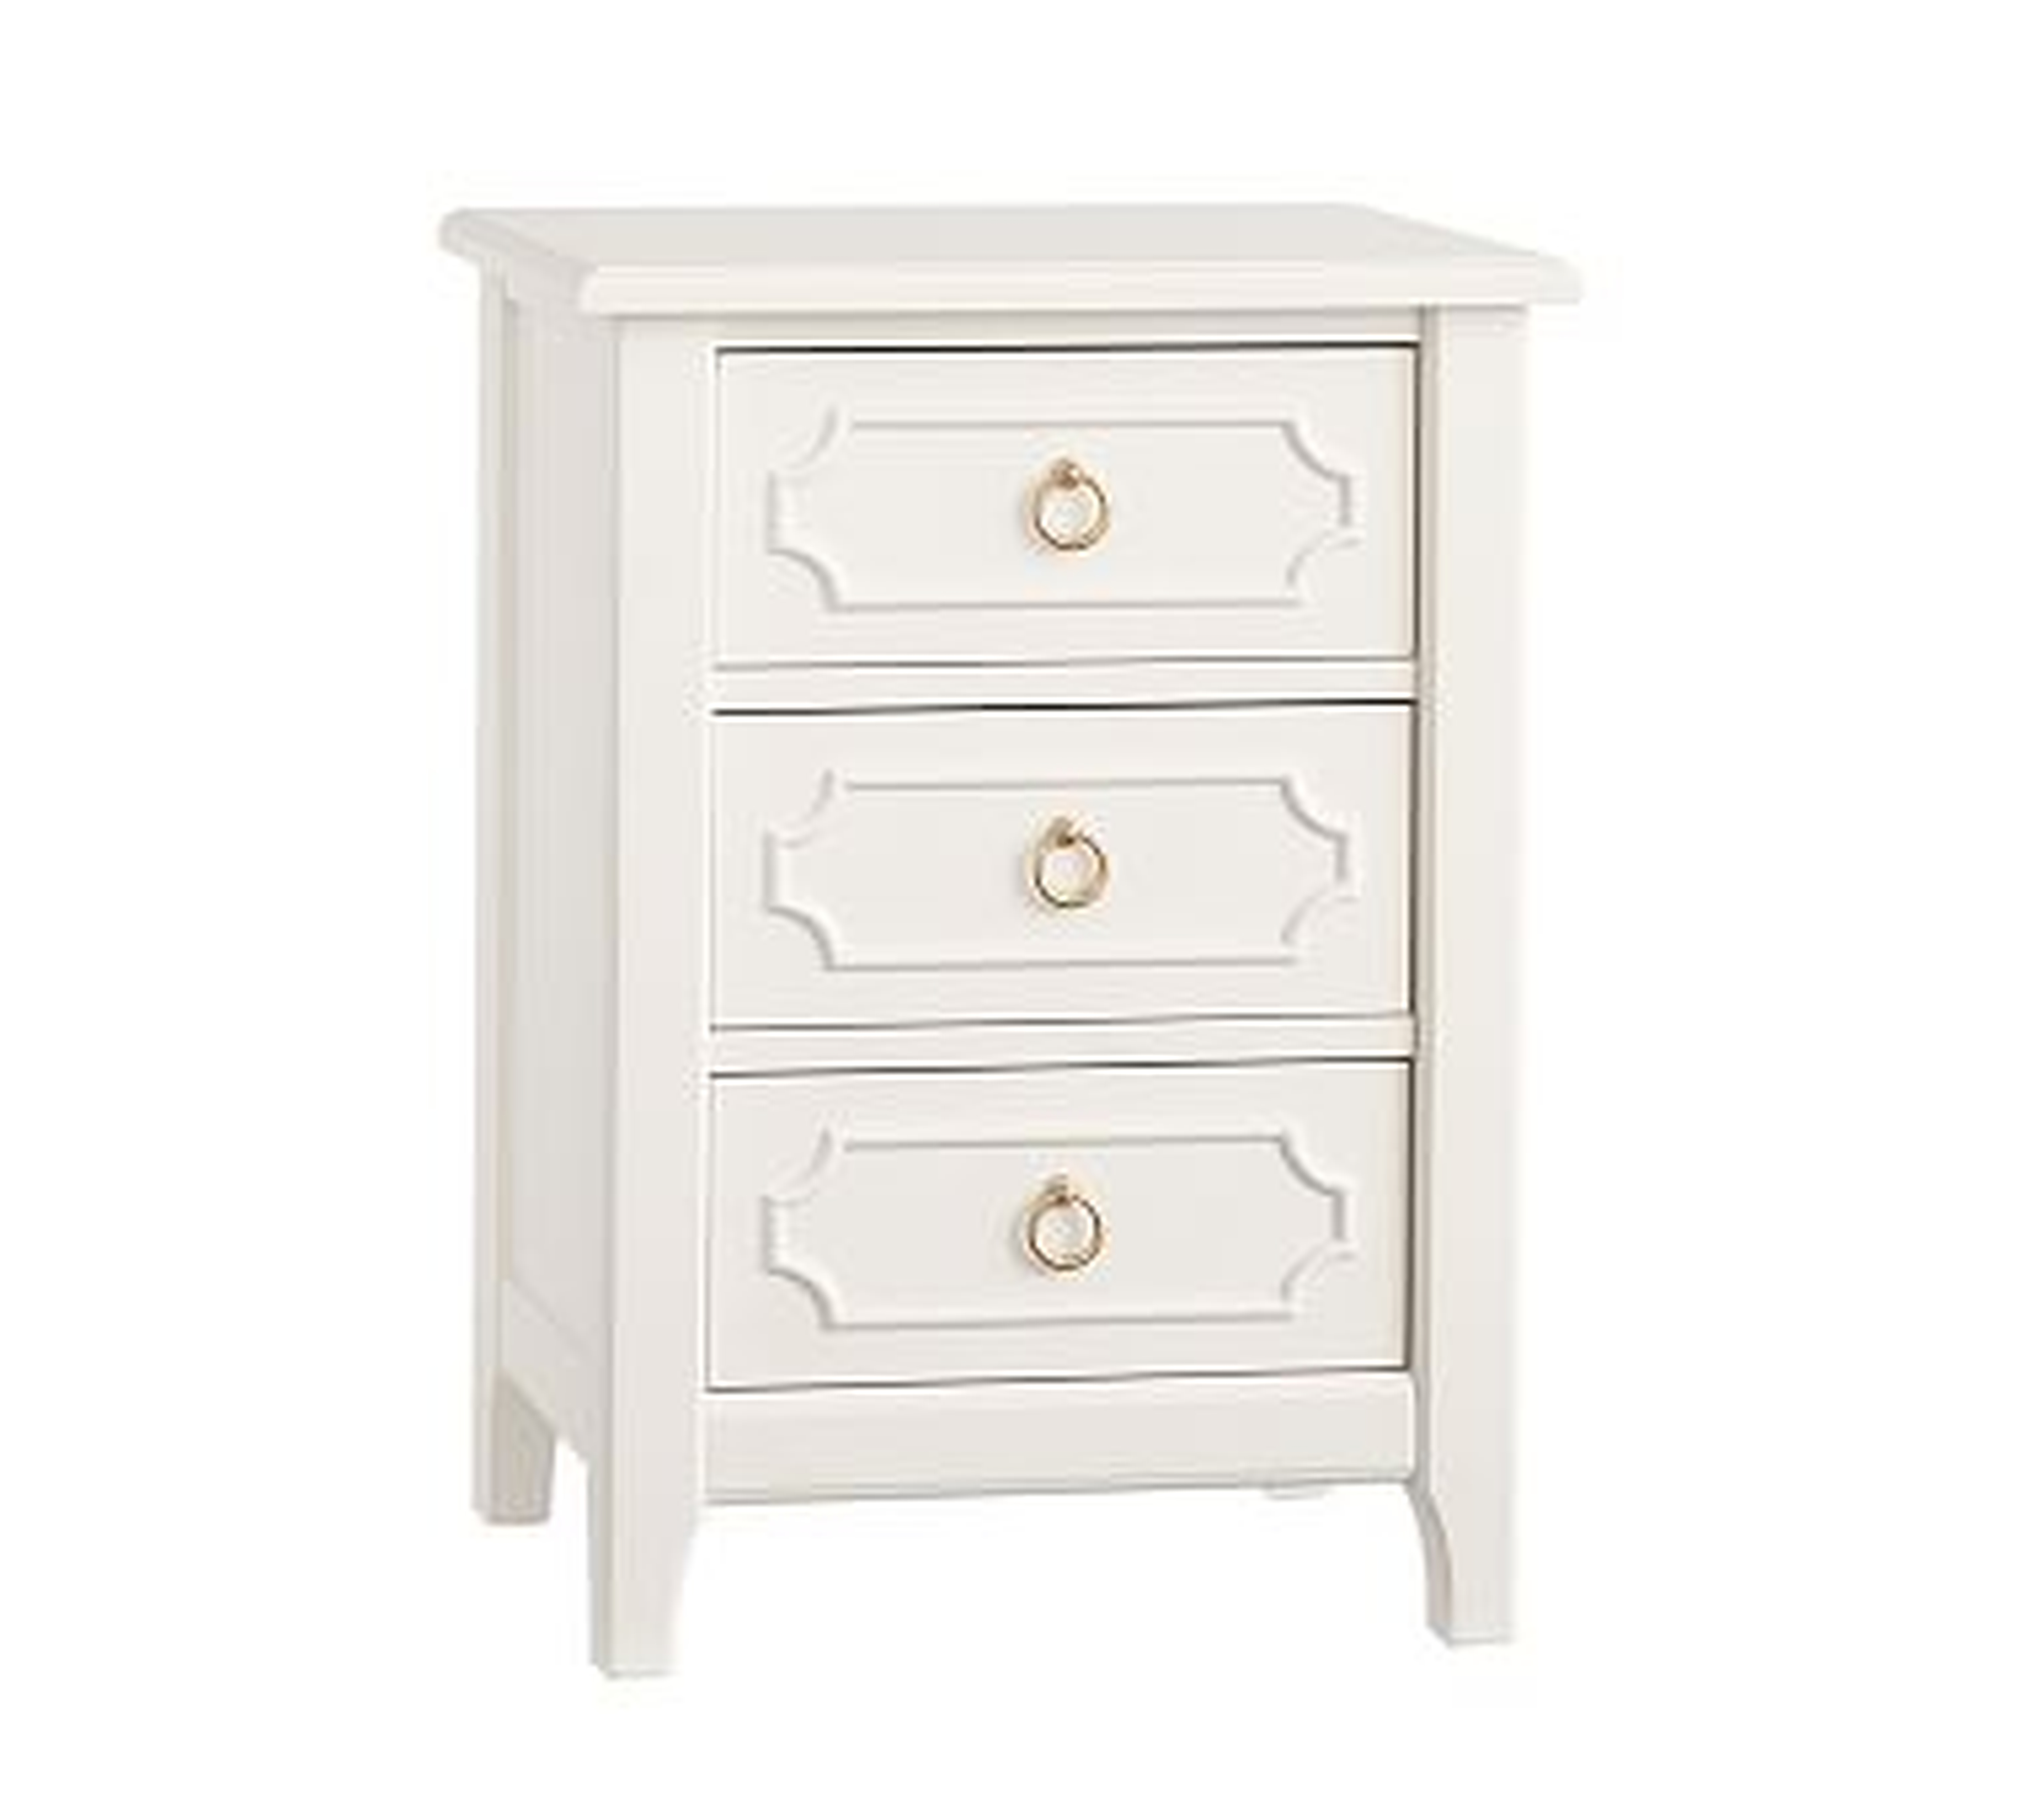 Ava Regency Nightstand, Simply White, In-Home Delivery - Pottery Barn Kids